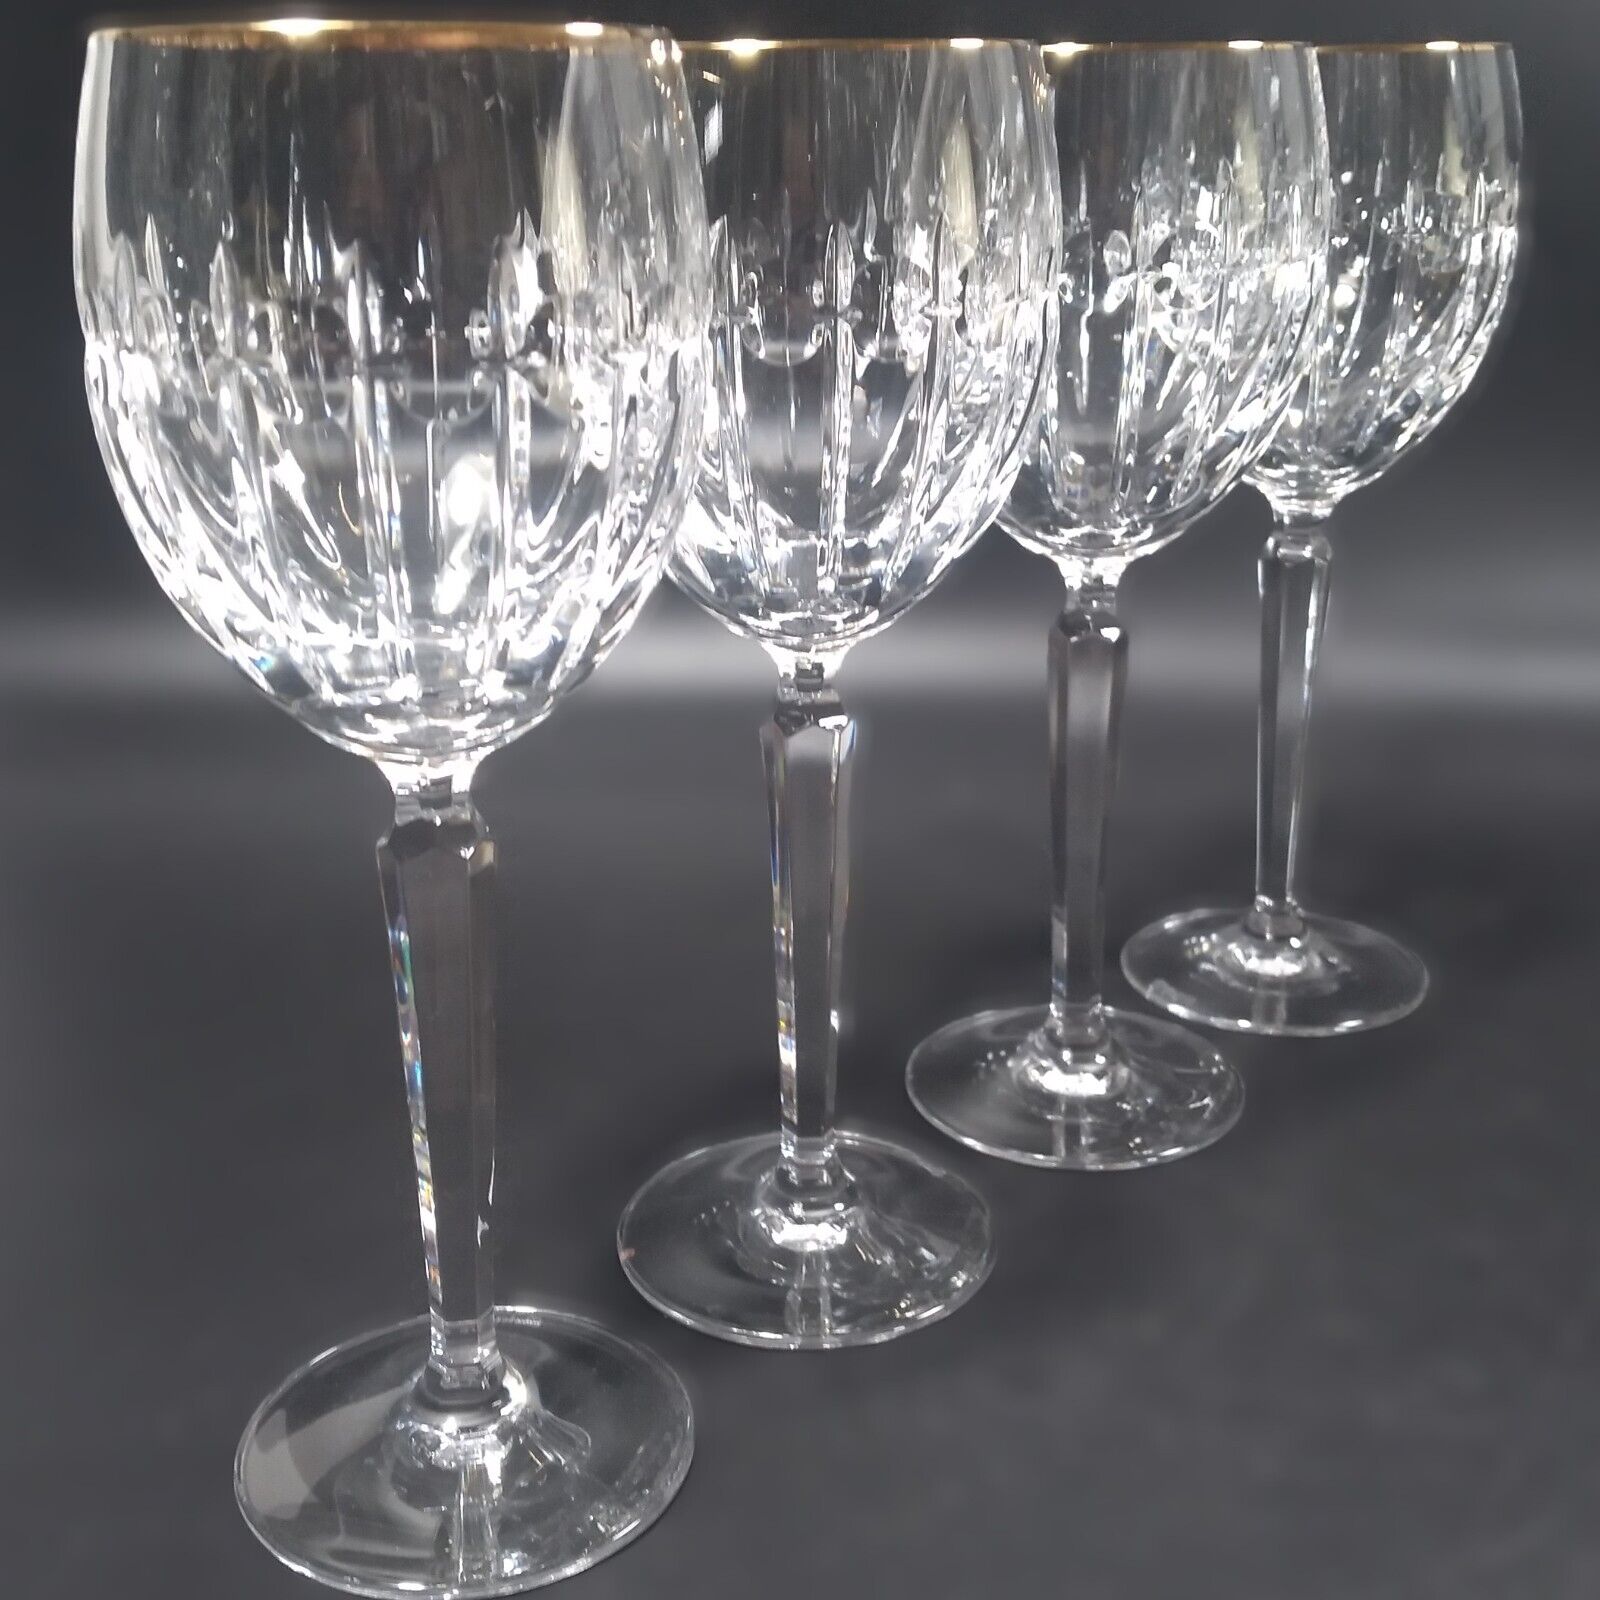 4 WATERFORD Crystal GRENVILLE GOLD Wine Goblets Vertical Cuts & Dots w Gold Rim